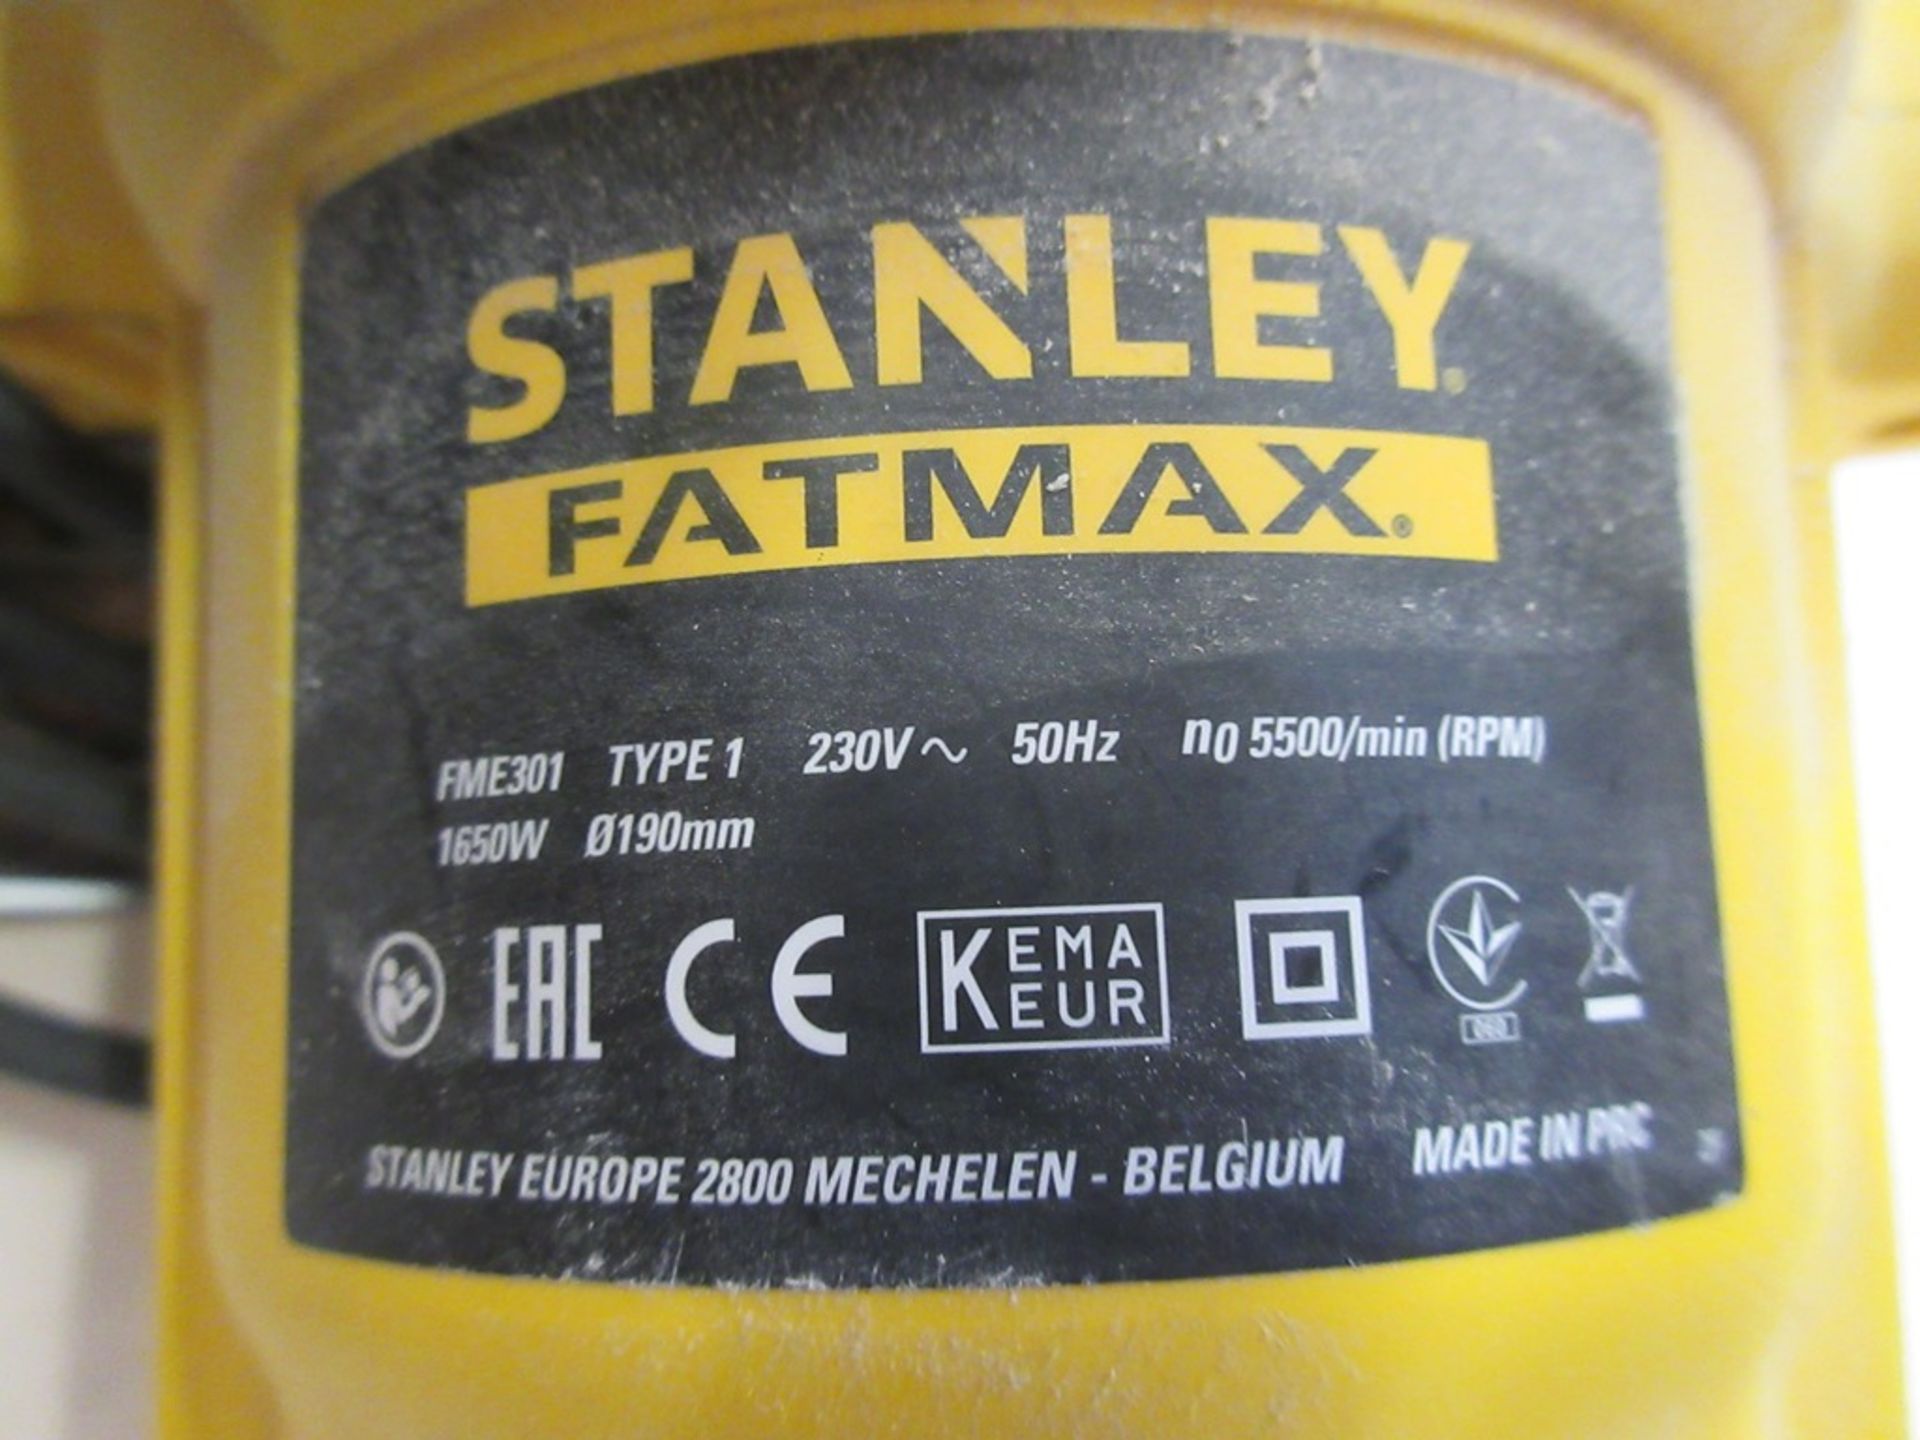 Stanley Fatmax FME 301 circular saw, 240v - Image 2 of 3